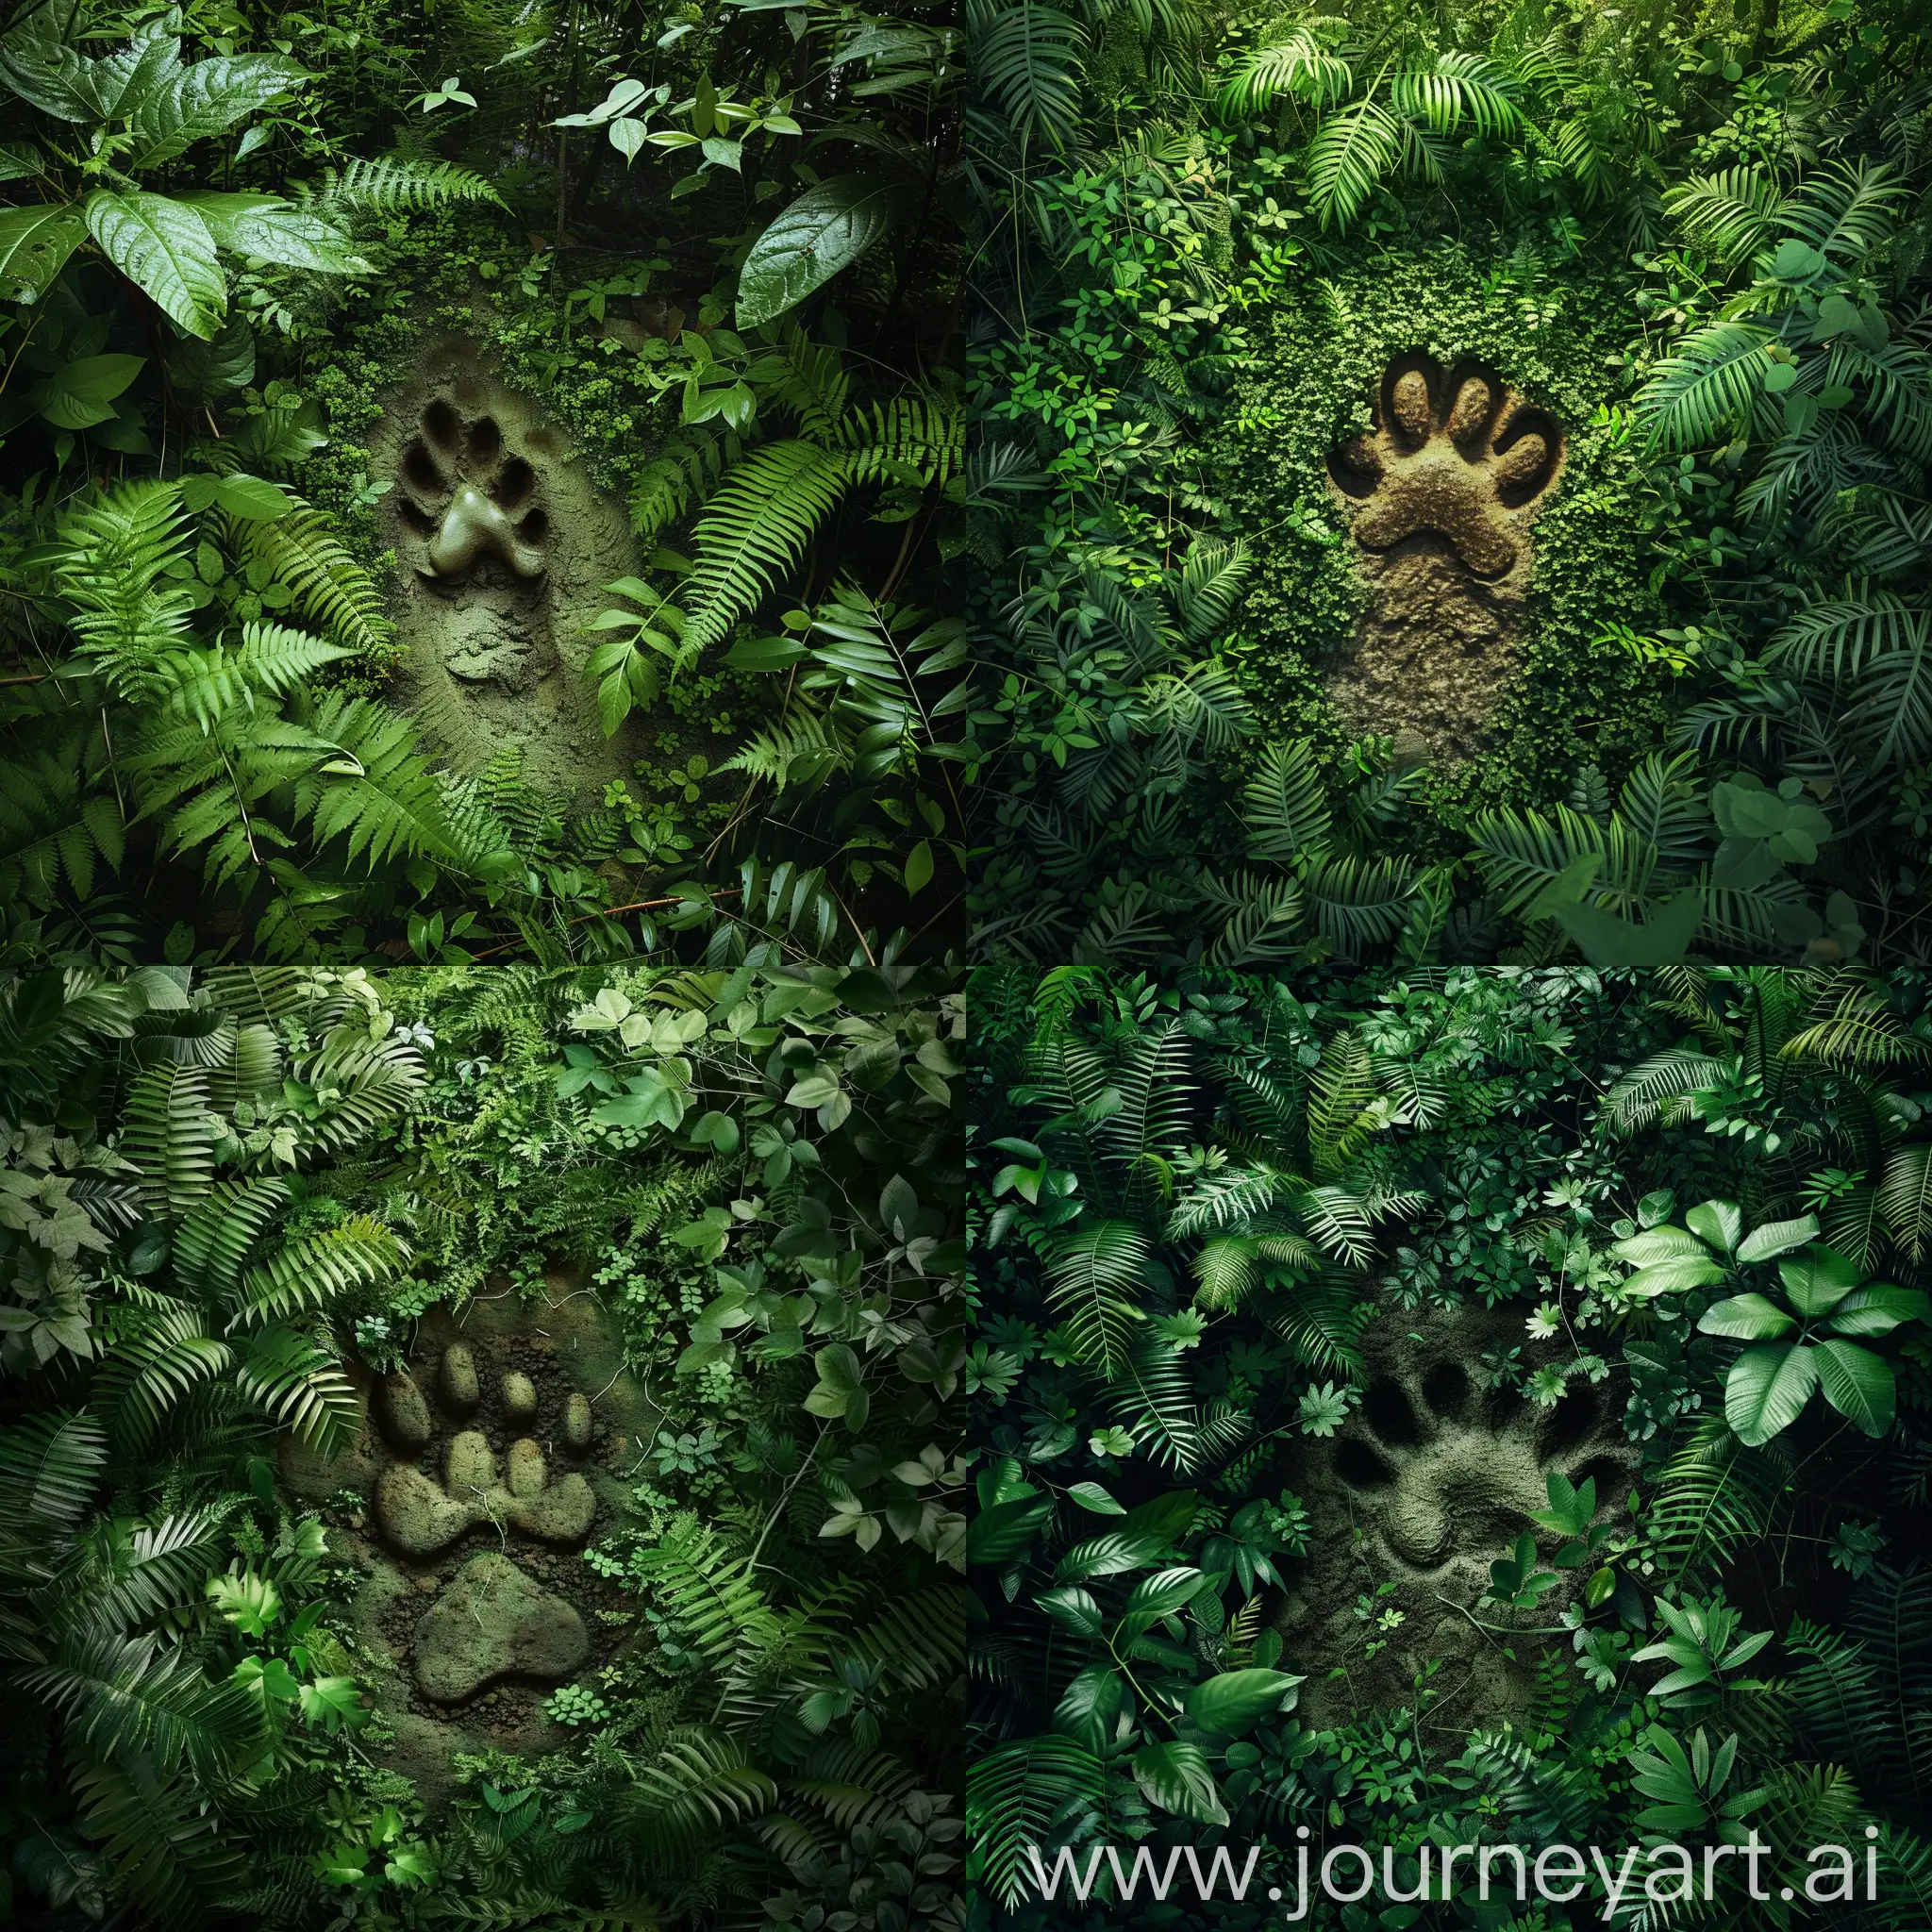 Visualize a solitary pawprint, deeply etched into the soft earth of a jungle floor, seen from a top-down perspective. Surrounding the pawprint is a dense carpet of vibrant green foliage, including ferns, vines, and small bushes. The canopy above filters sunlight, casting dappled shadows on the forest floor.

The pawprint itself is large and imposing, suggesting the presence of a powerful and potentially dangerous creature. Its distinct shape and size command attention, standing out prominently against the backdrop of the jungle undergrowth.

The surrounding jungle teems with life, with the occasional glimpse of smaller creatures darting between the leaves. Yet, the focus remains on the singular pawprint, leaving an air of mystery and anticipation as to what creature may have left its mark upon the forest floor.